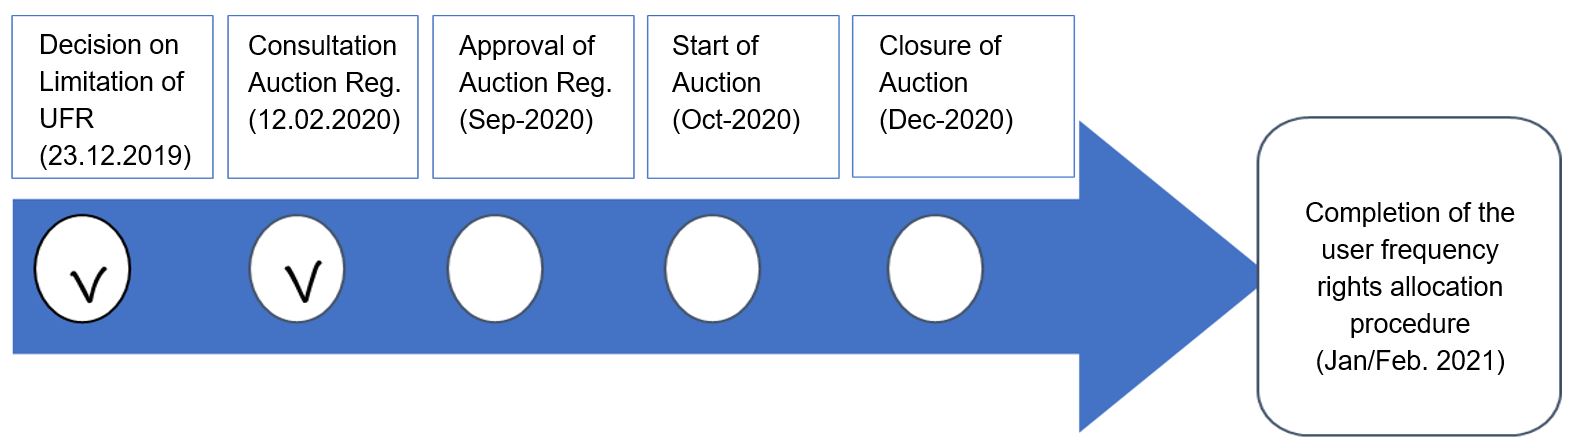 As shown in the indicative schedule below, it is expected that the auction should start in October 2020 and the allocation of frequency user rights (UFR) is planned for 2021.